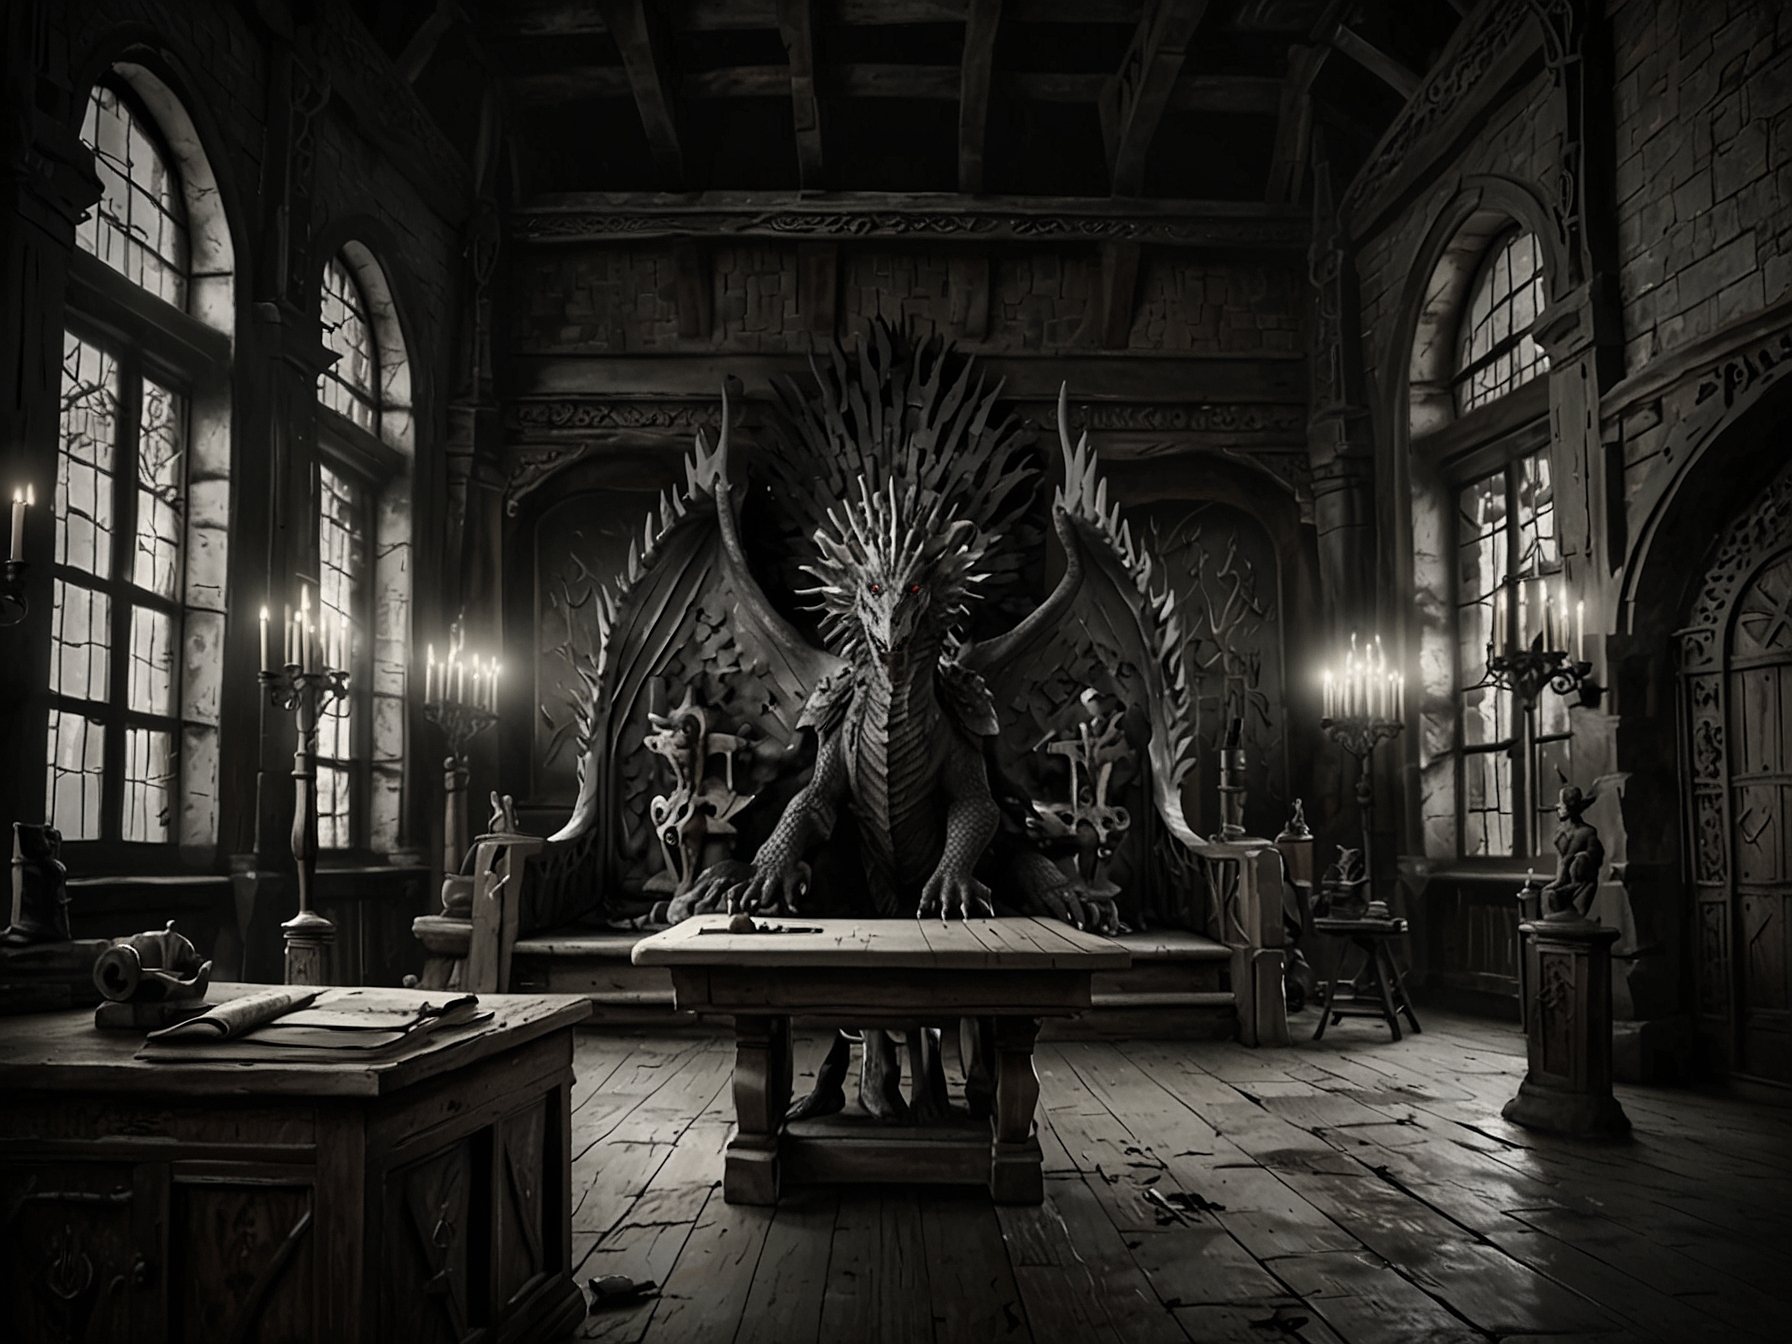 A behind-the-scenes look at the set of 'House of the Dragon', highlighting the commitment to detailed storytelling and refined character depiction that addresses past criticisms of 'Game of Thrones'.